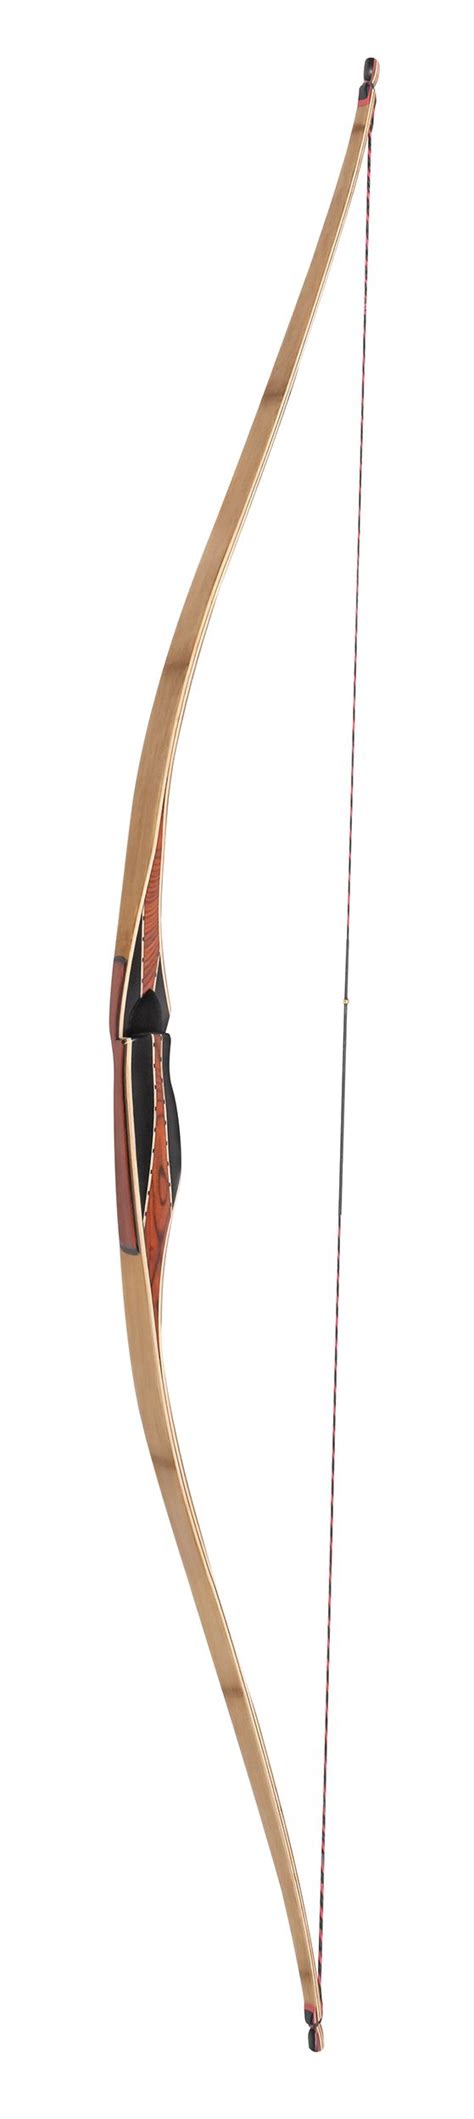 Pin On Archery Bows